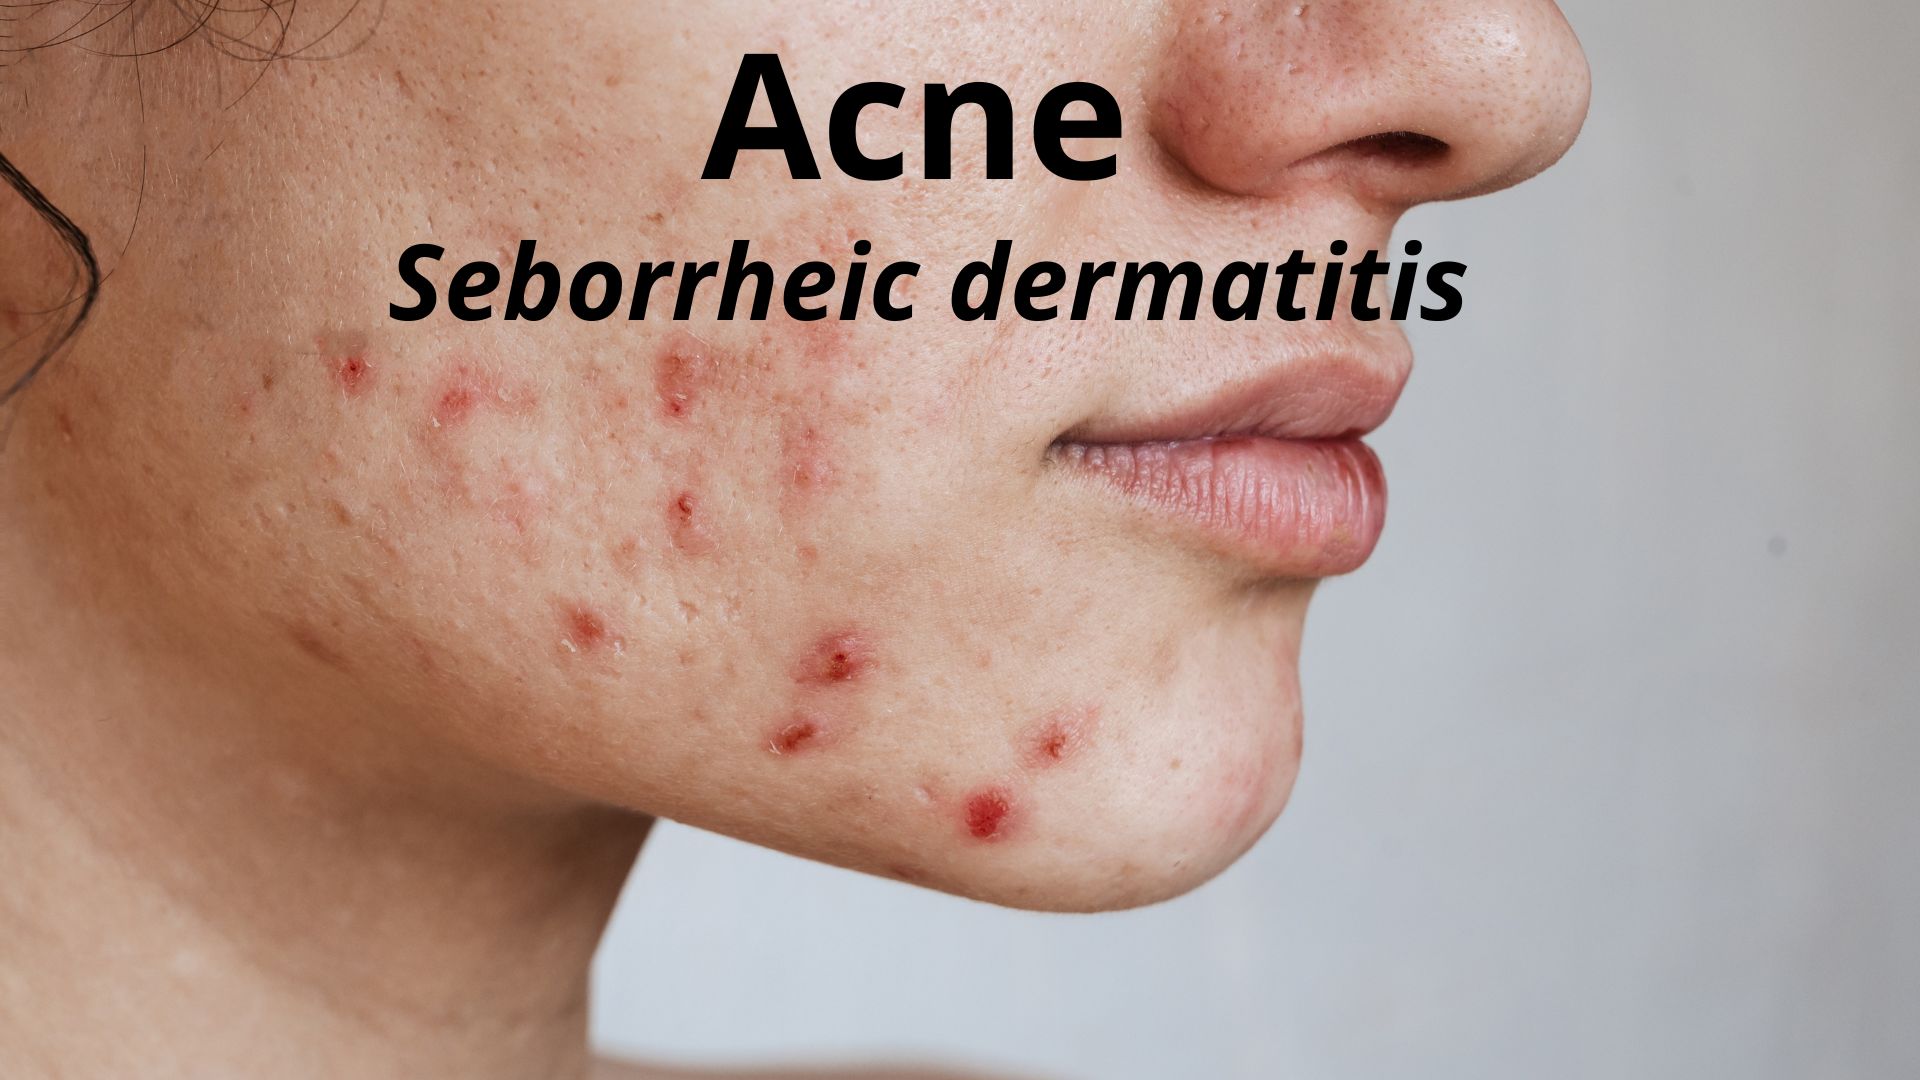 You are currently viewing Acne (Seborrheic dermatitis)